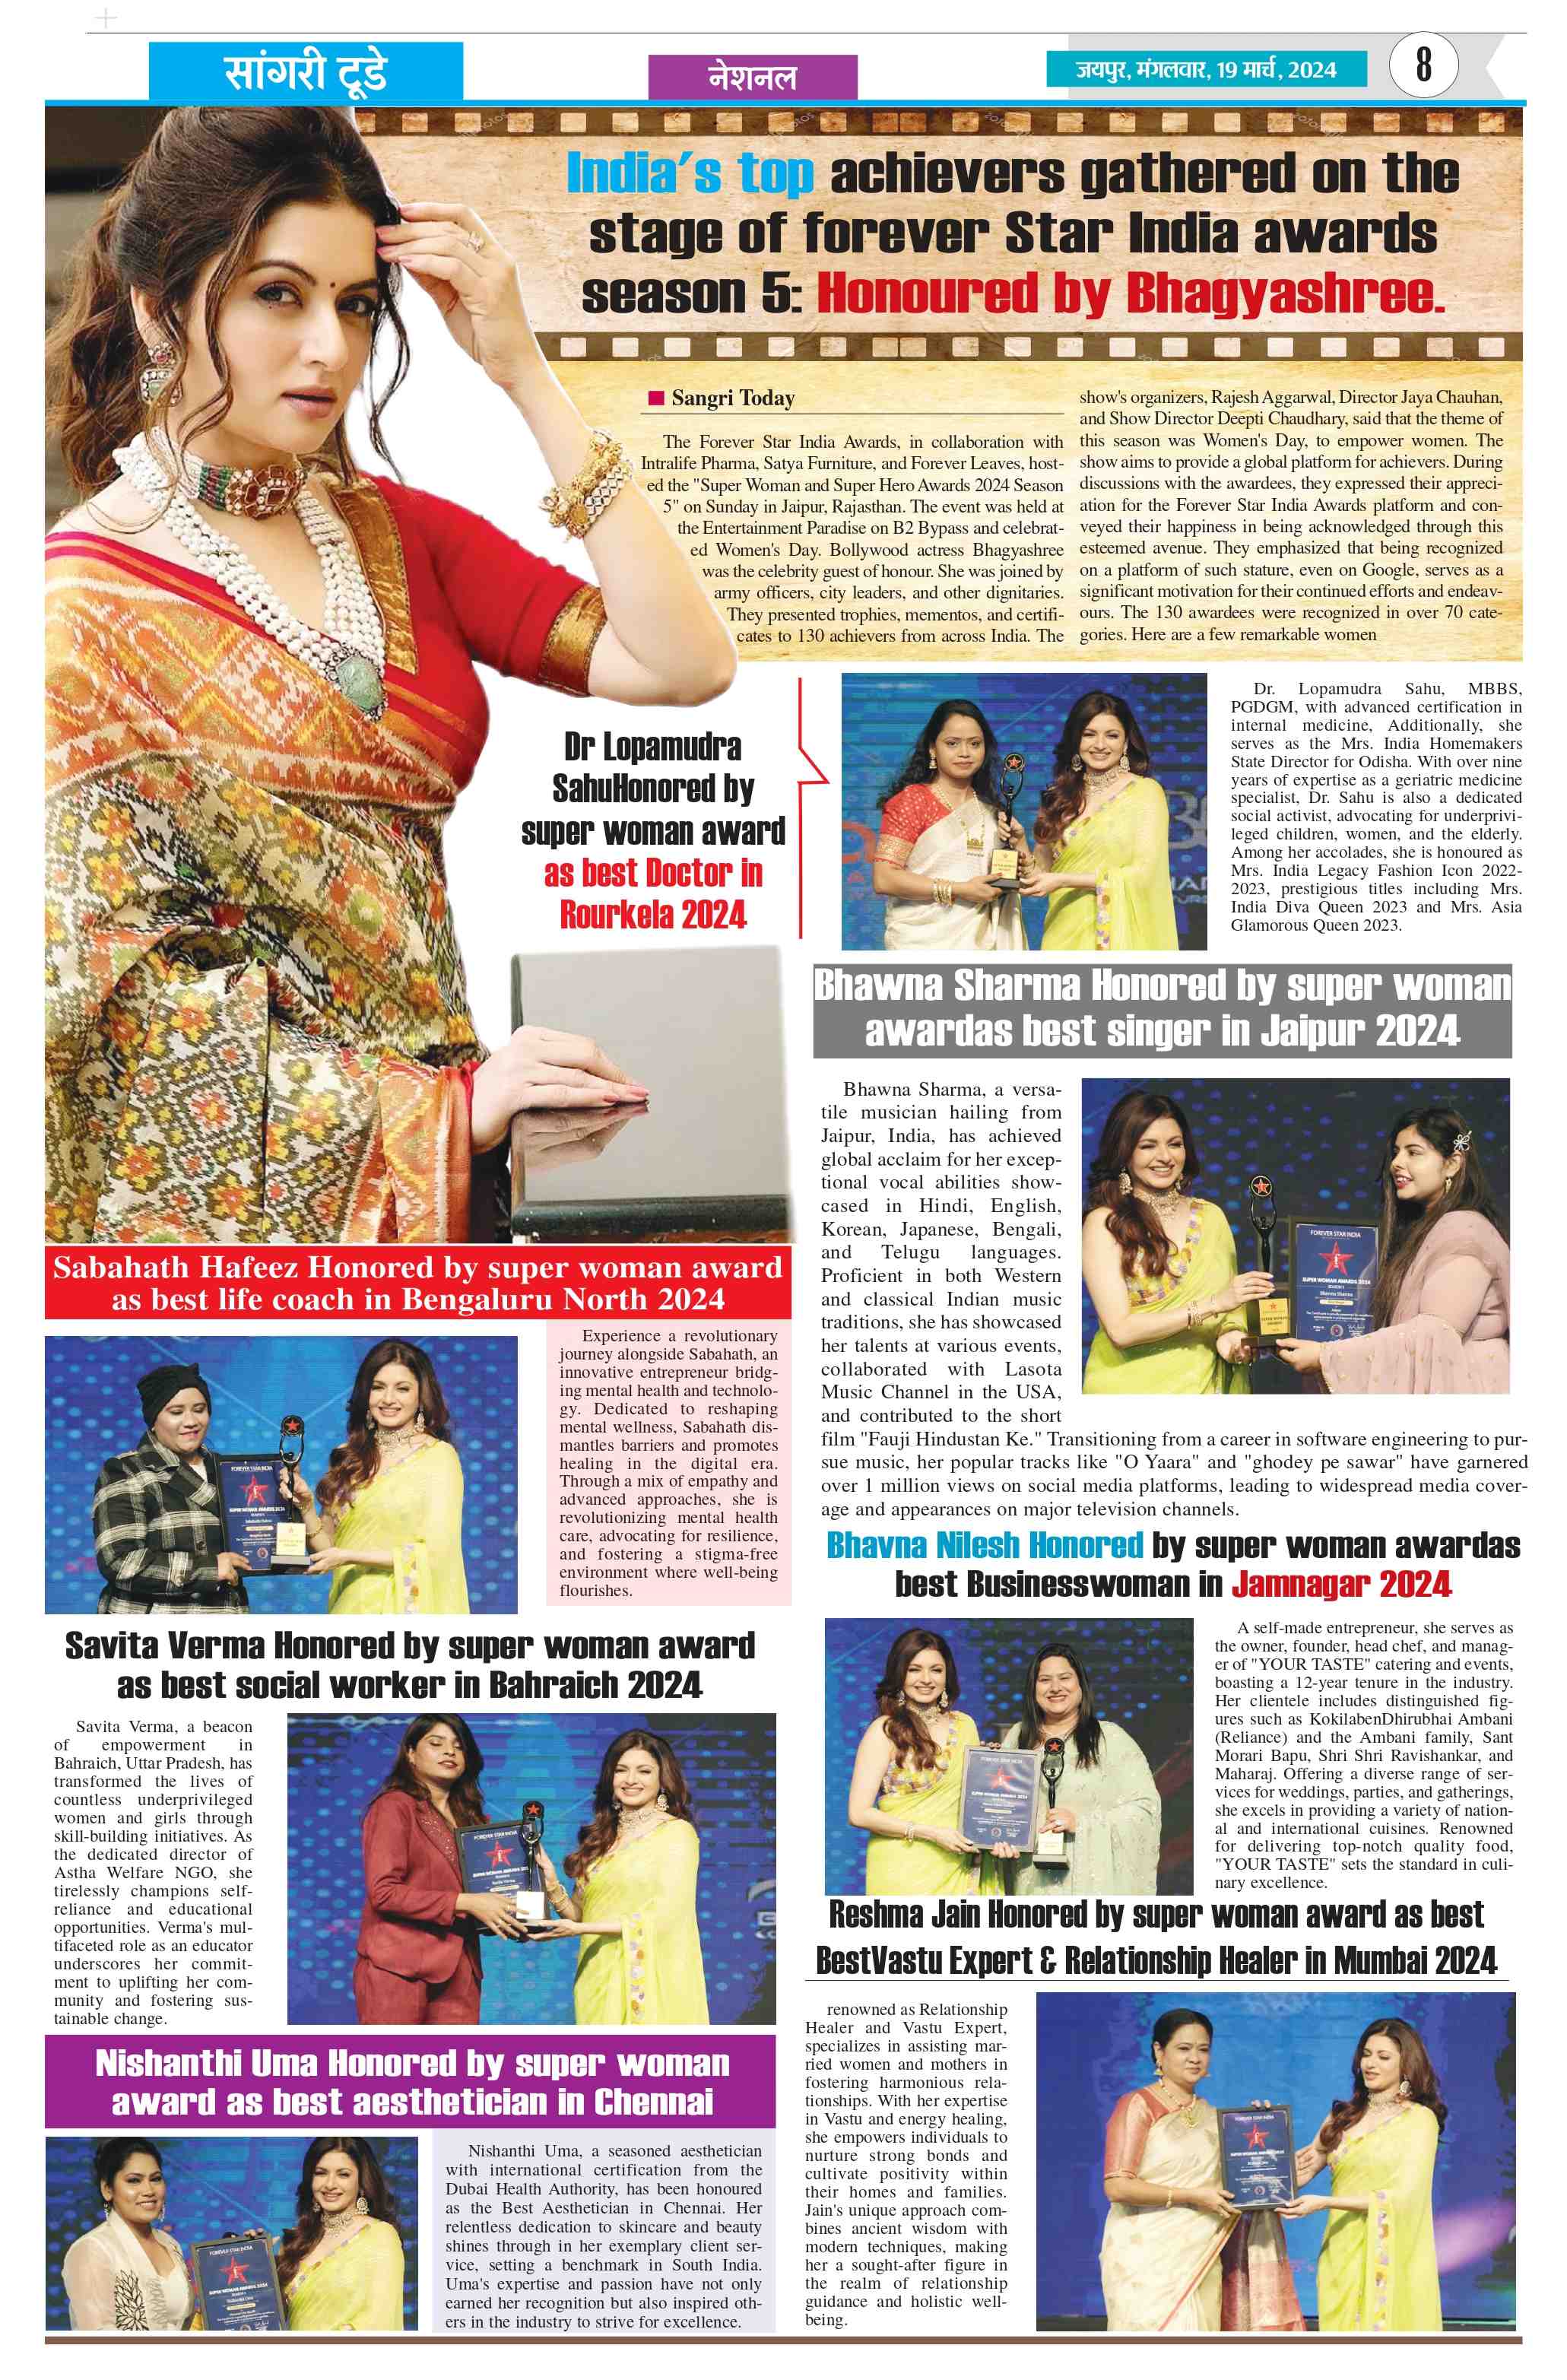 Bhagyashree presented Awards to Super Heroes and Super Womans of India